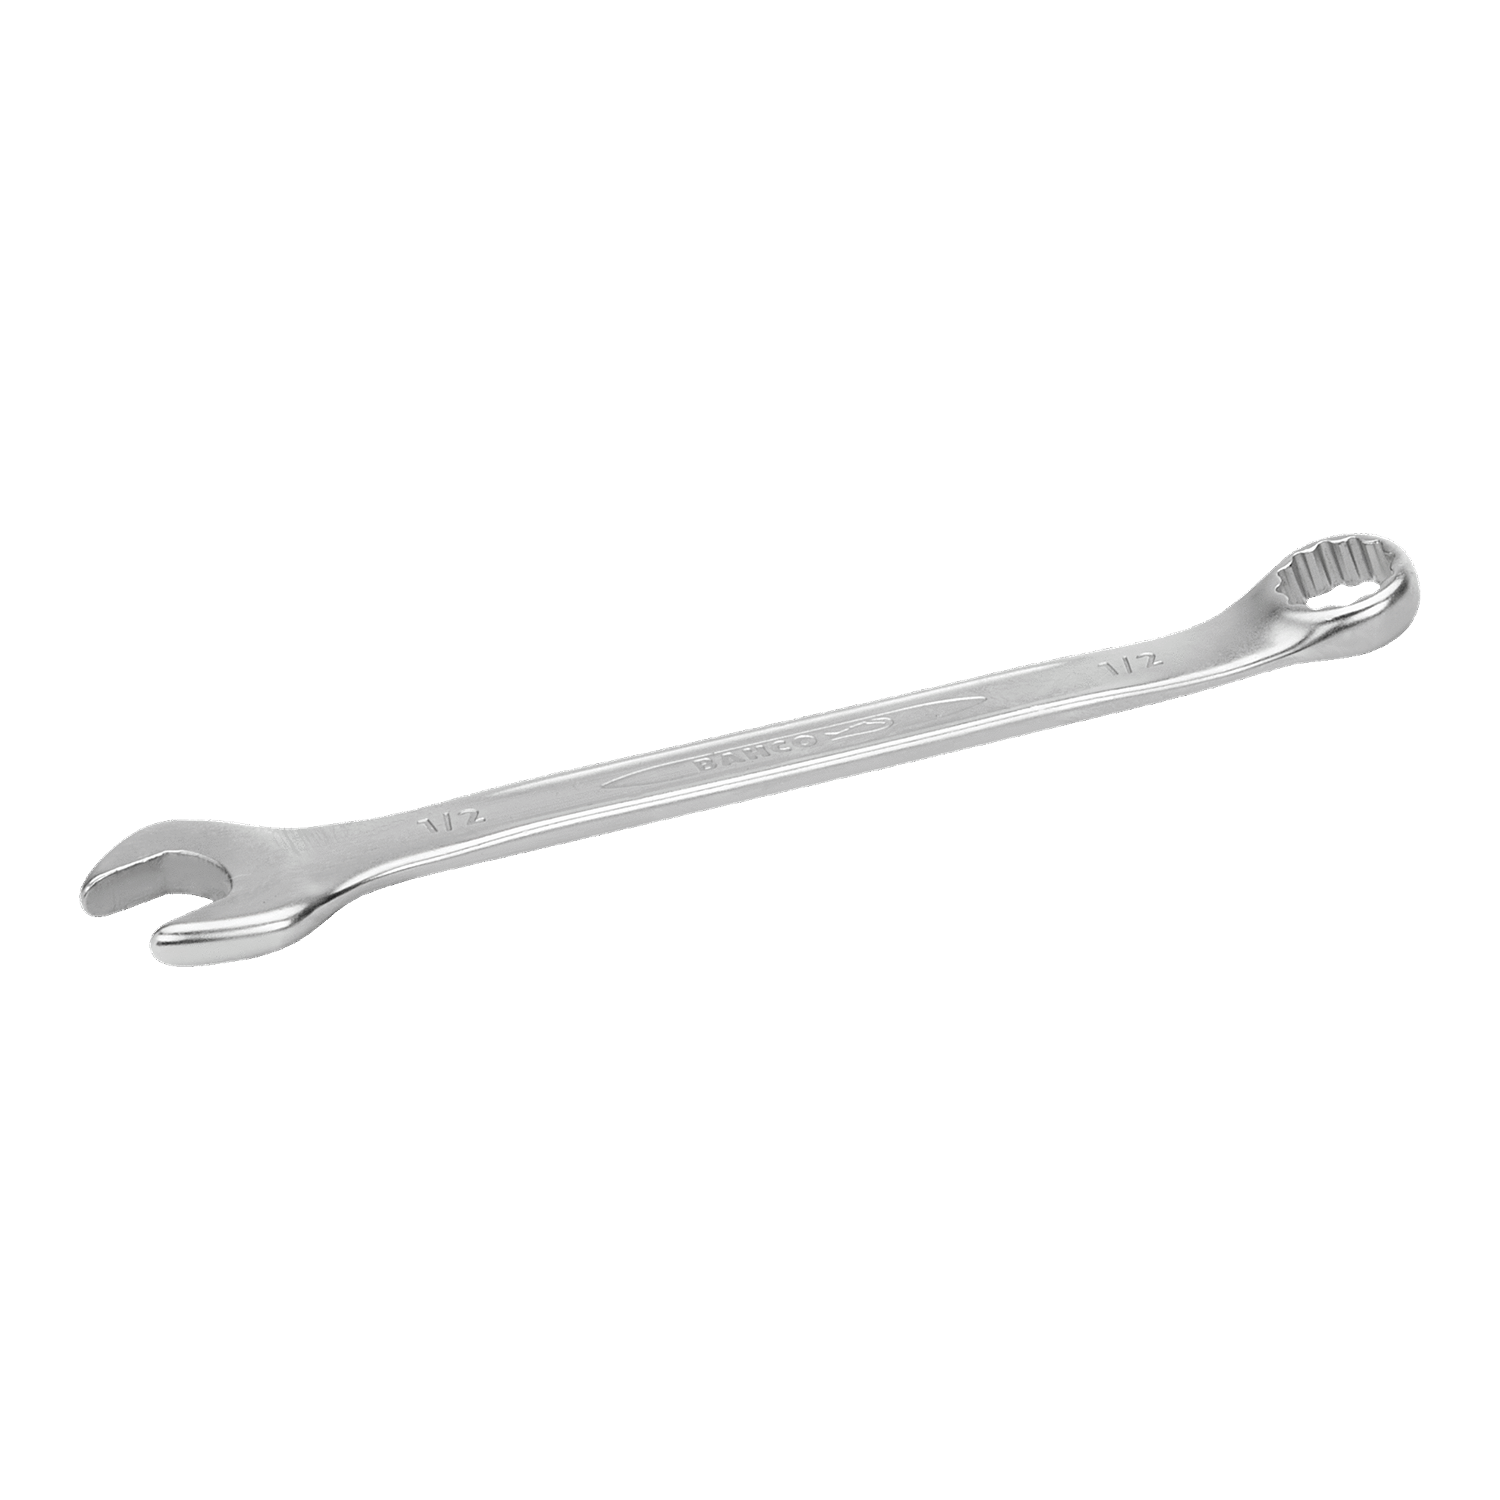 BAHCO 111Z Imperial Flat Combination Wrench With Chrome Finish - Premium Combination Wrench from BAHCO - Shop now at Yew Aik.